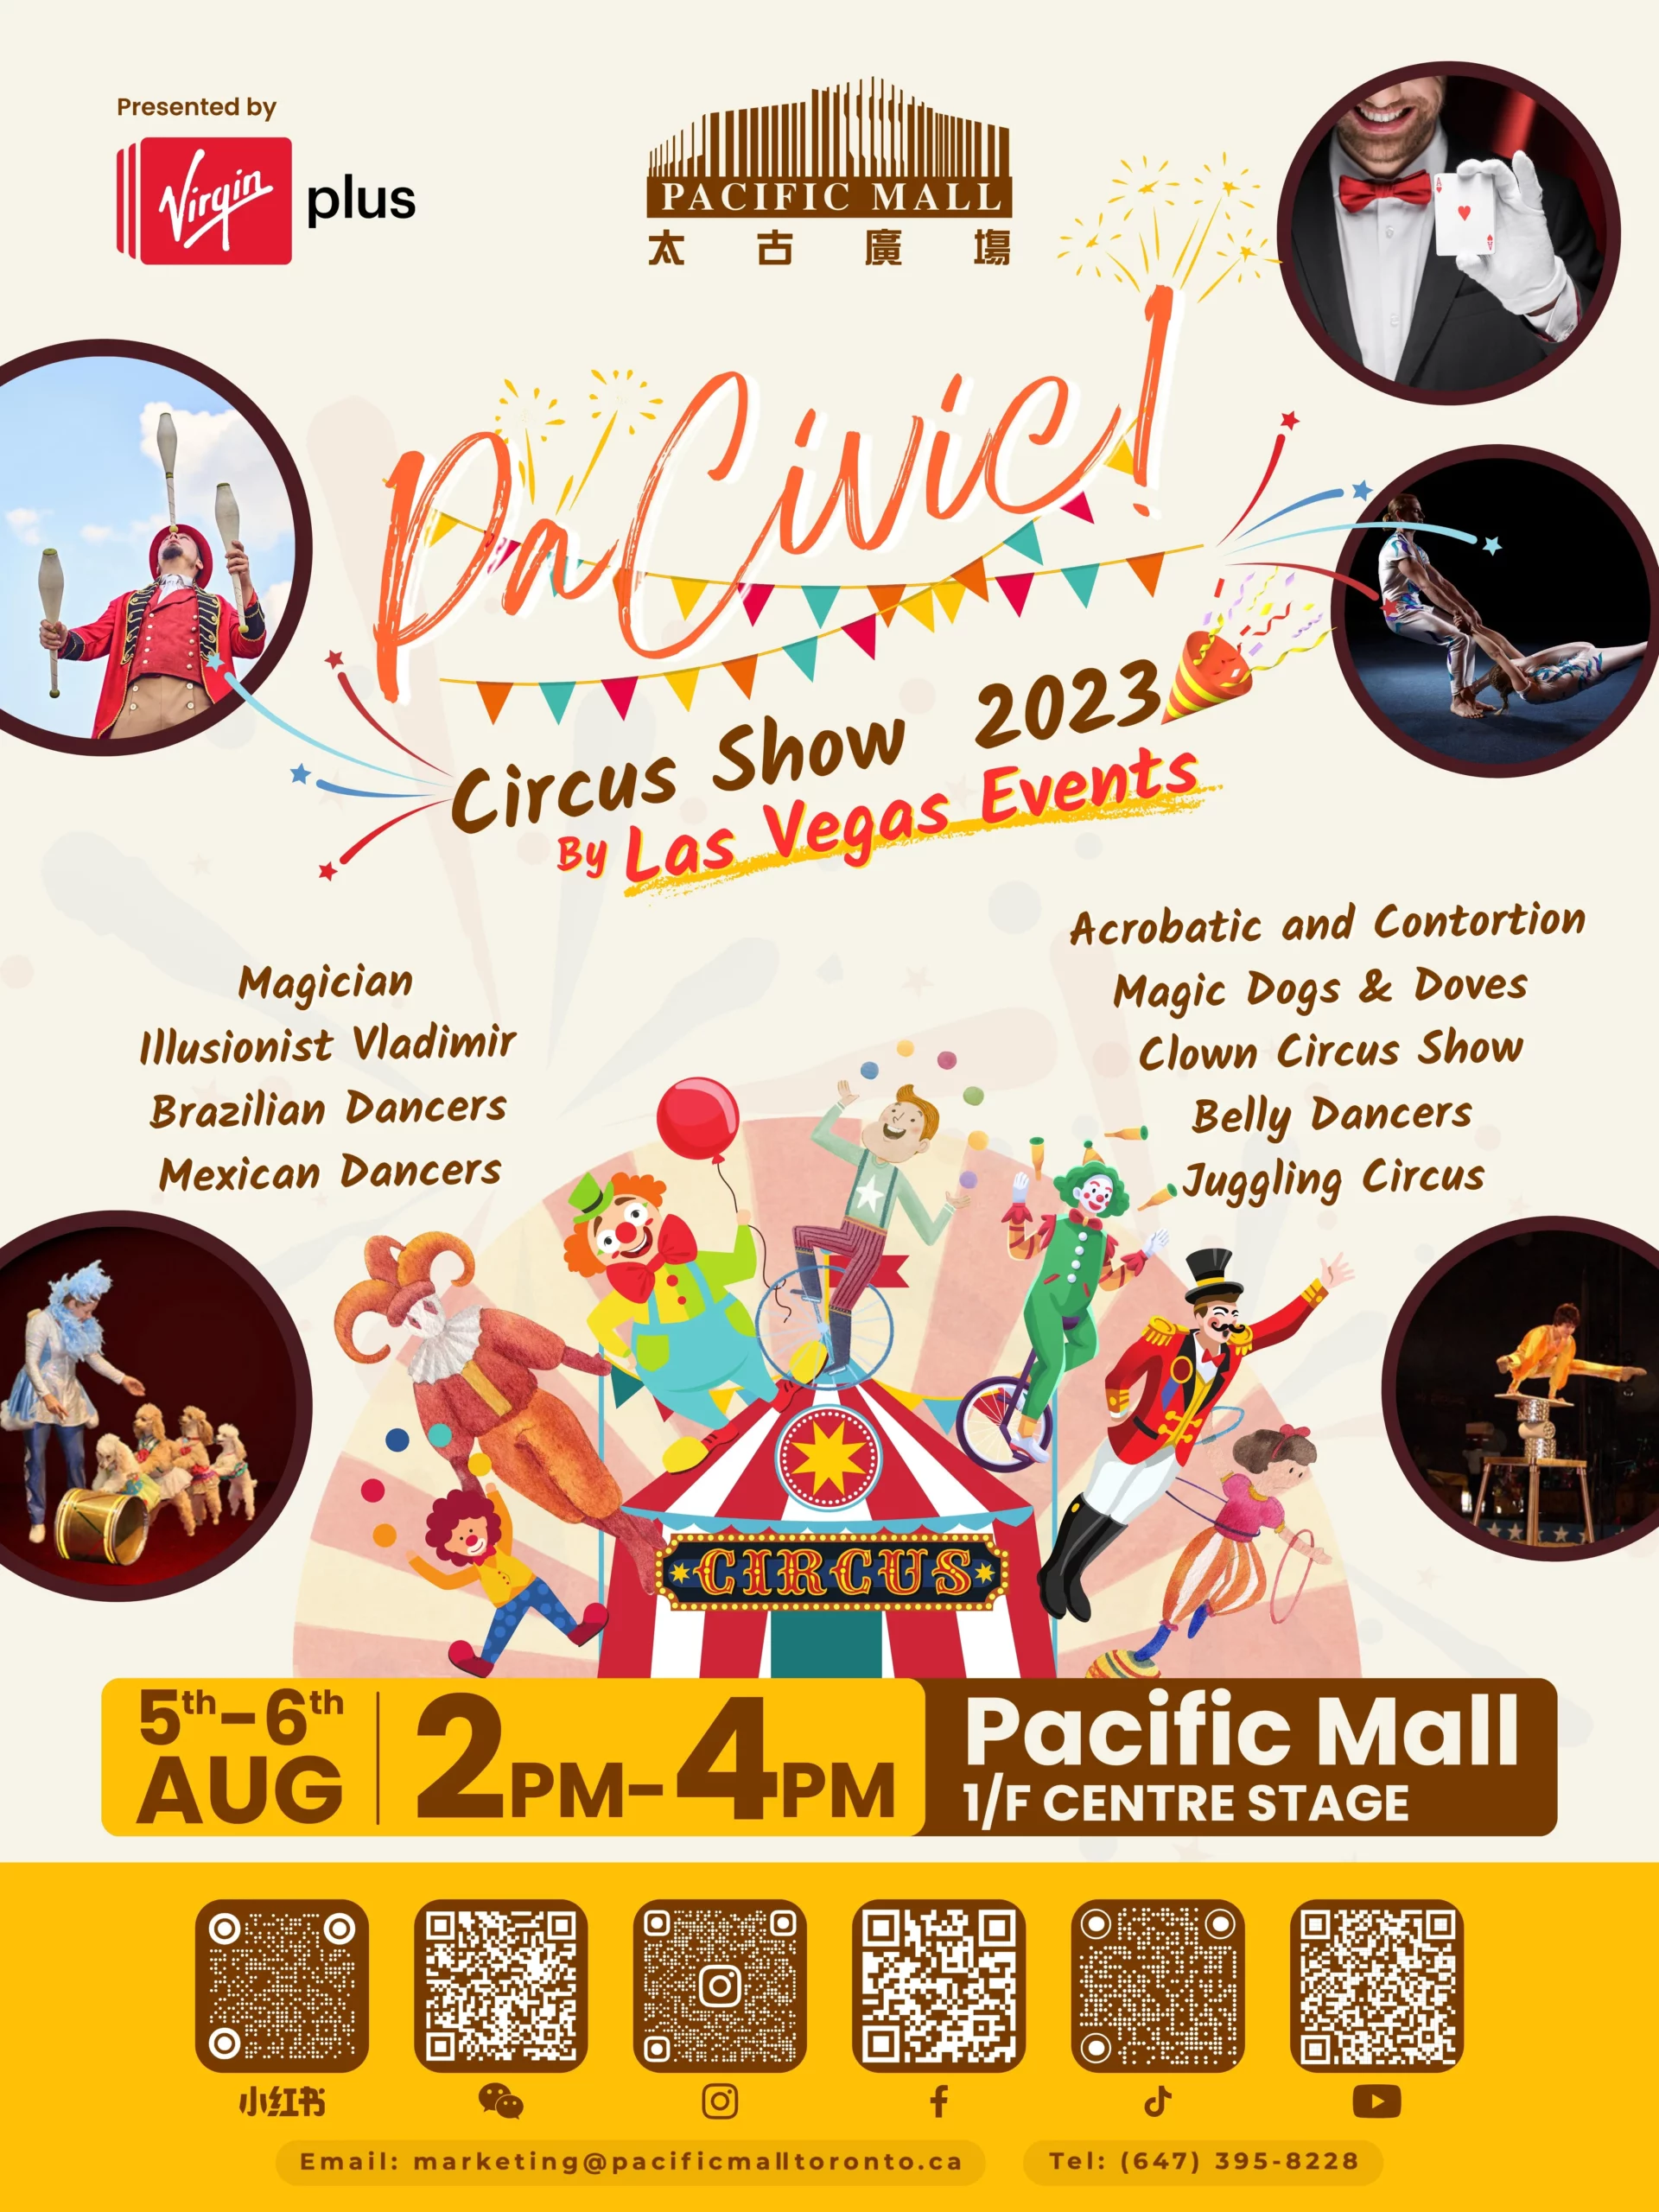 Virgin Plus Presents: Pacific Mall's Circus Show 2023